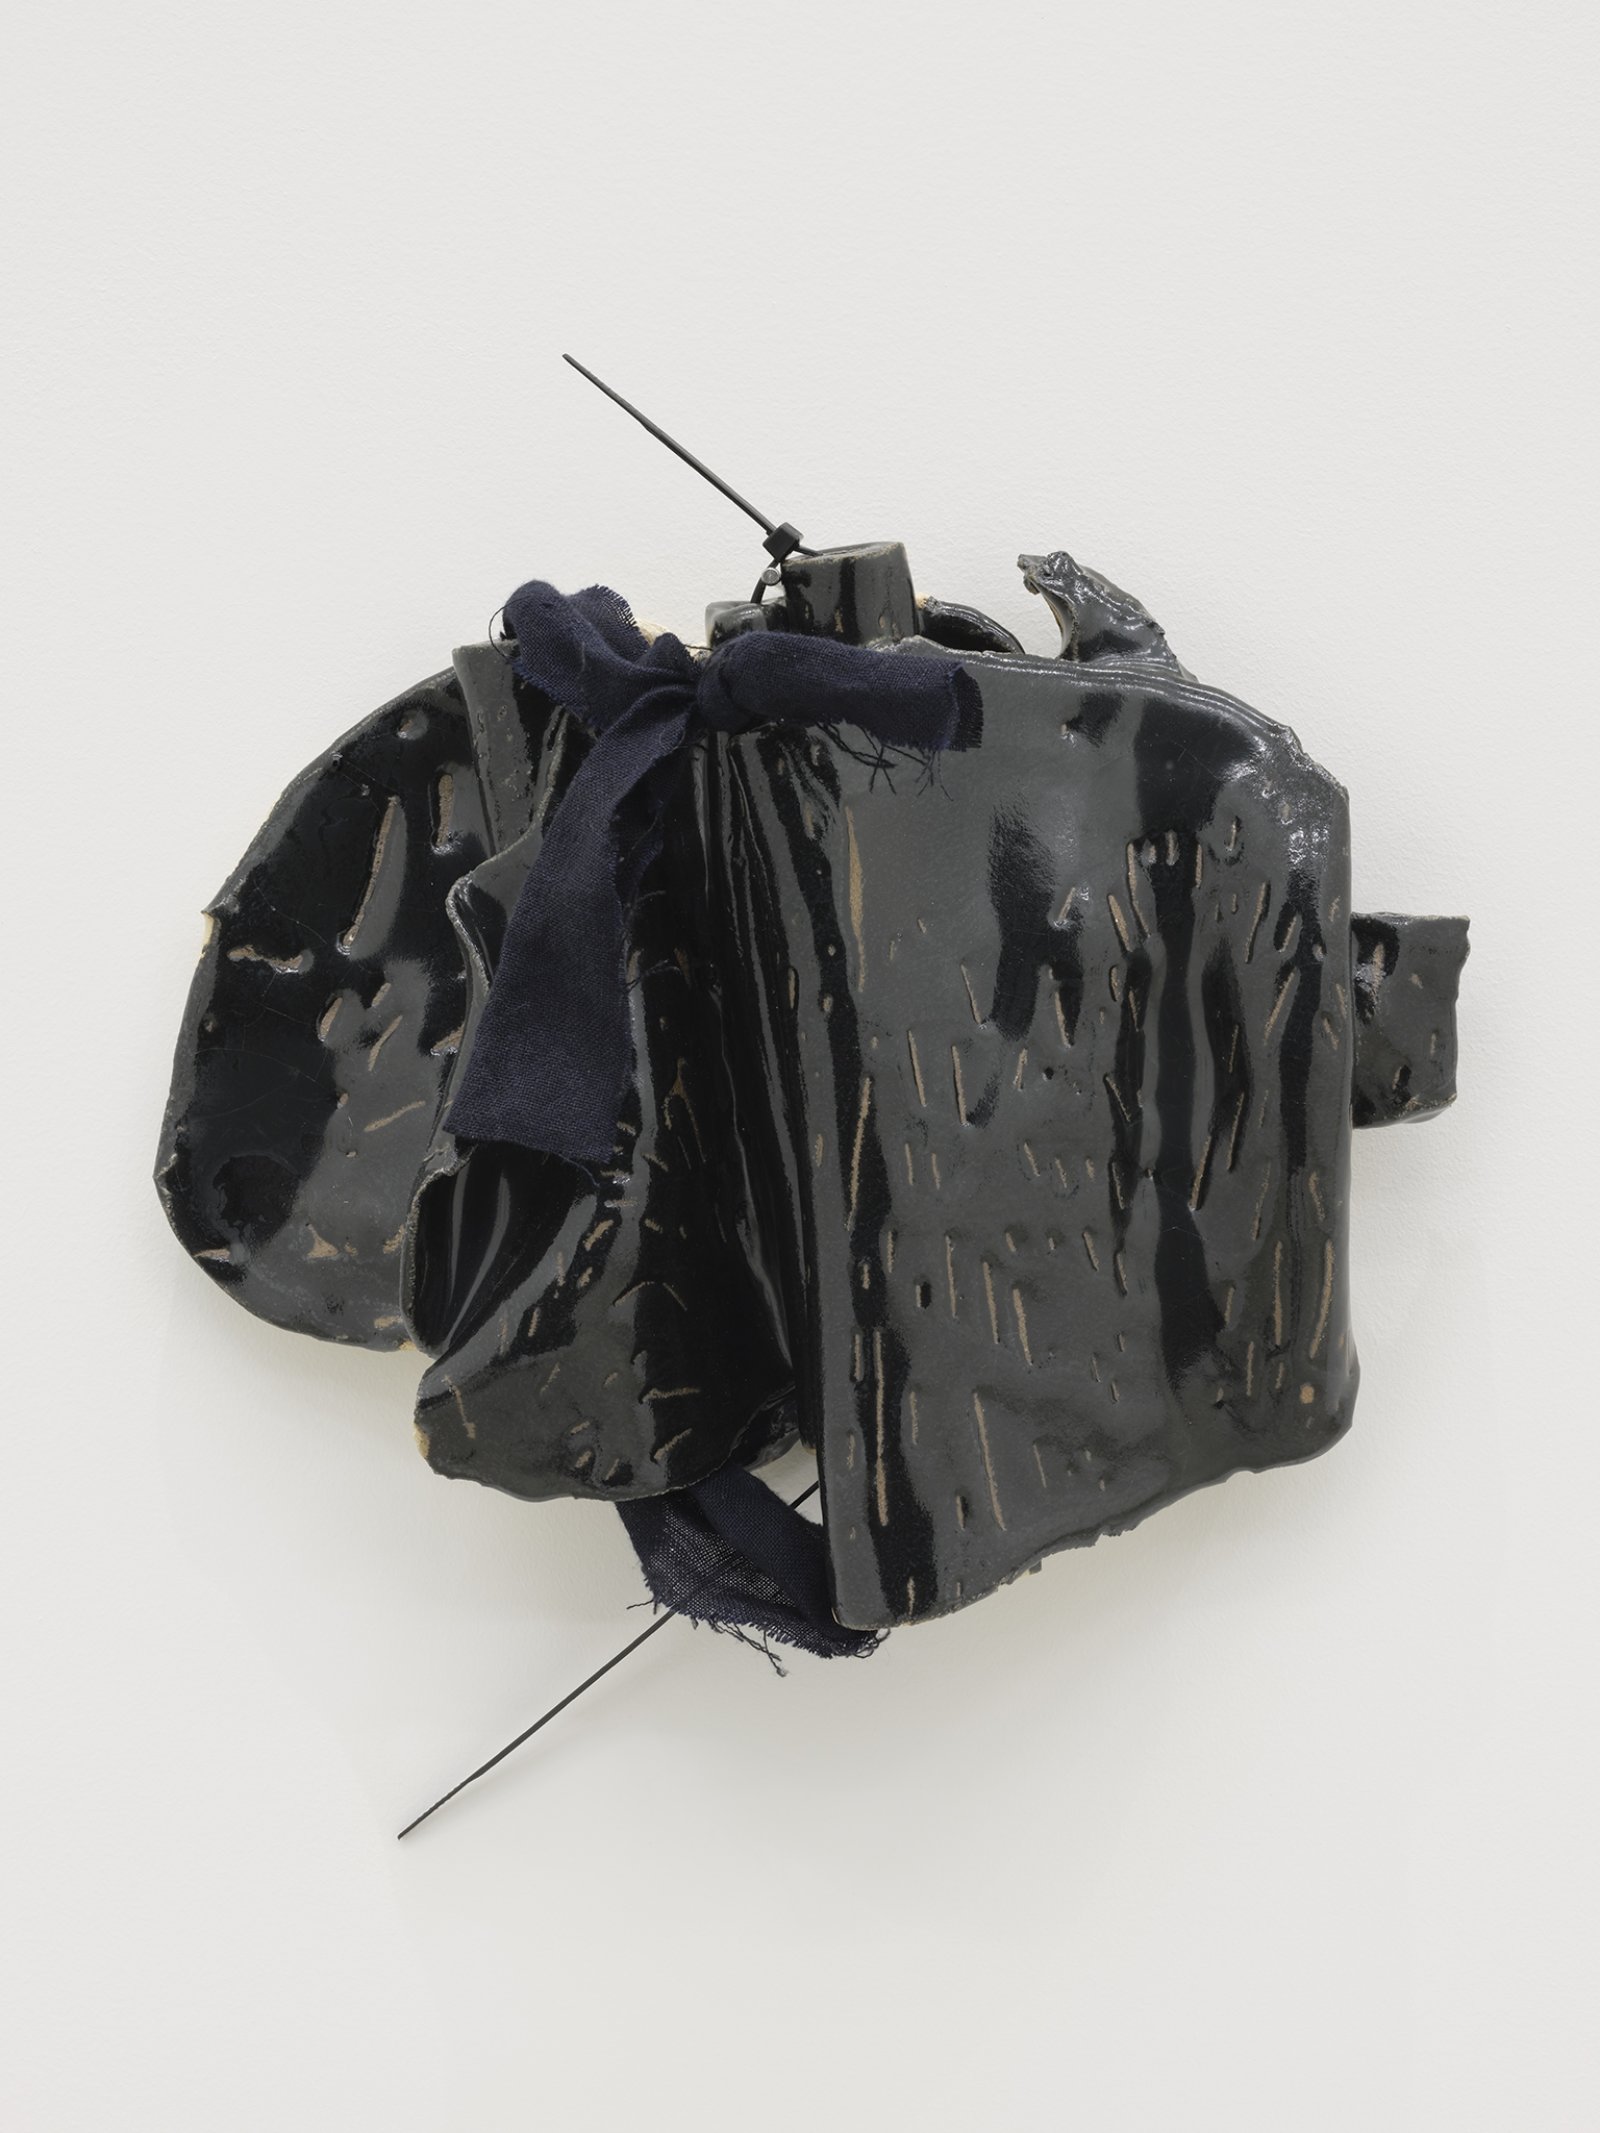 Christina Mackie, Token no. 10, 2019, stoneware, linen, cable ties, nail, 14 x 13 in. (36 x 32 cm)